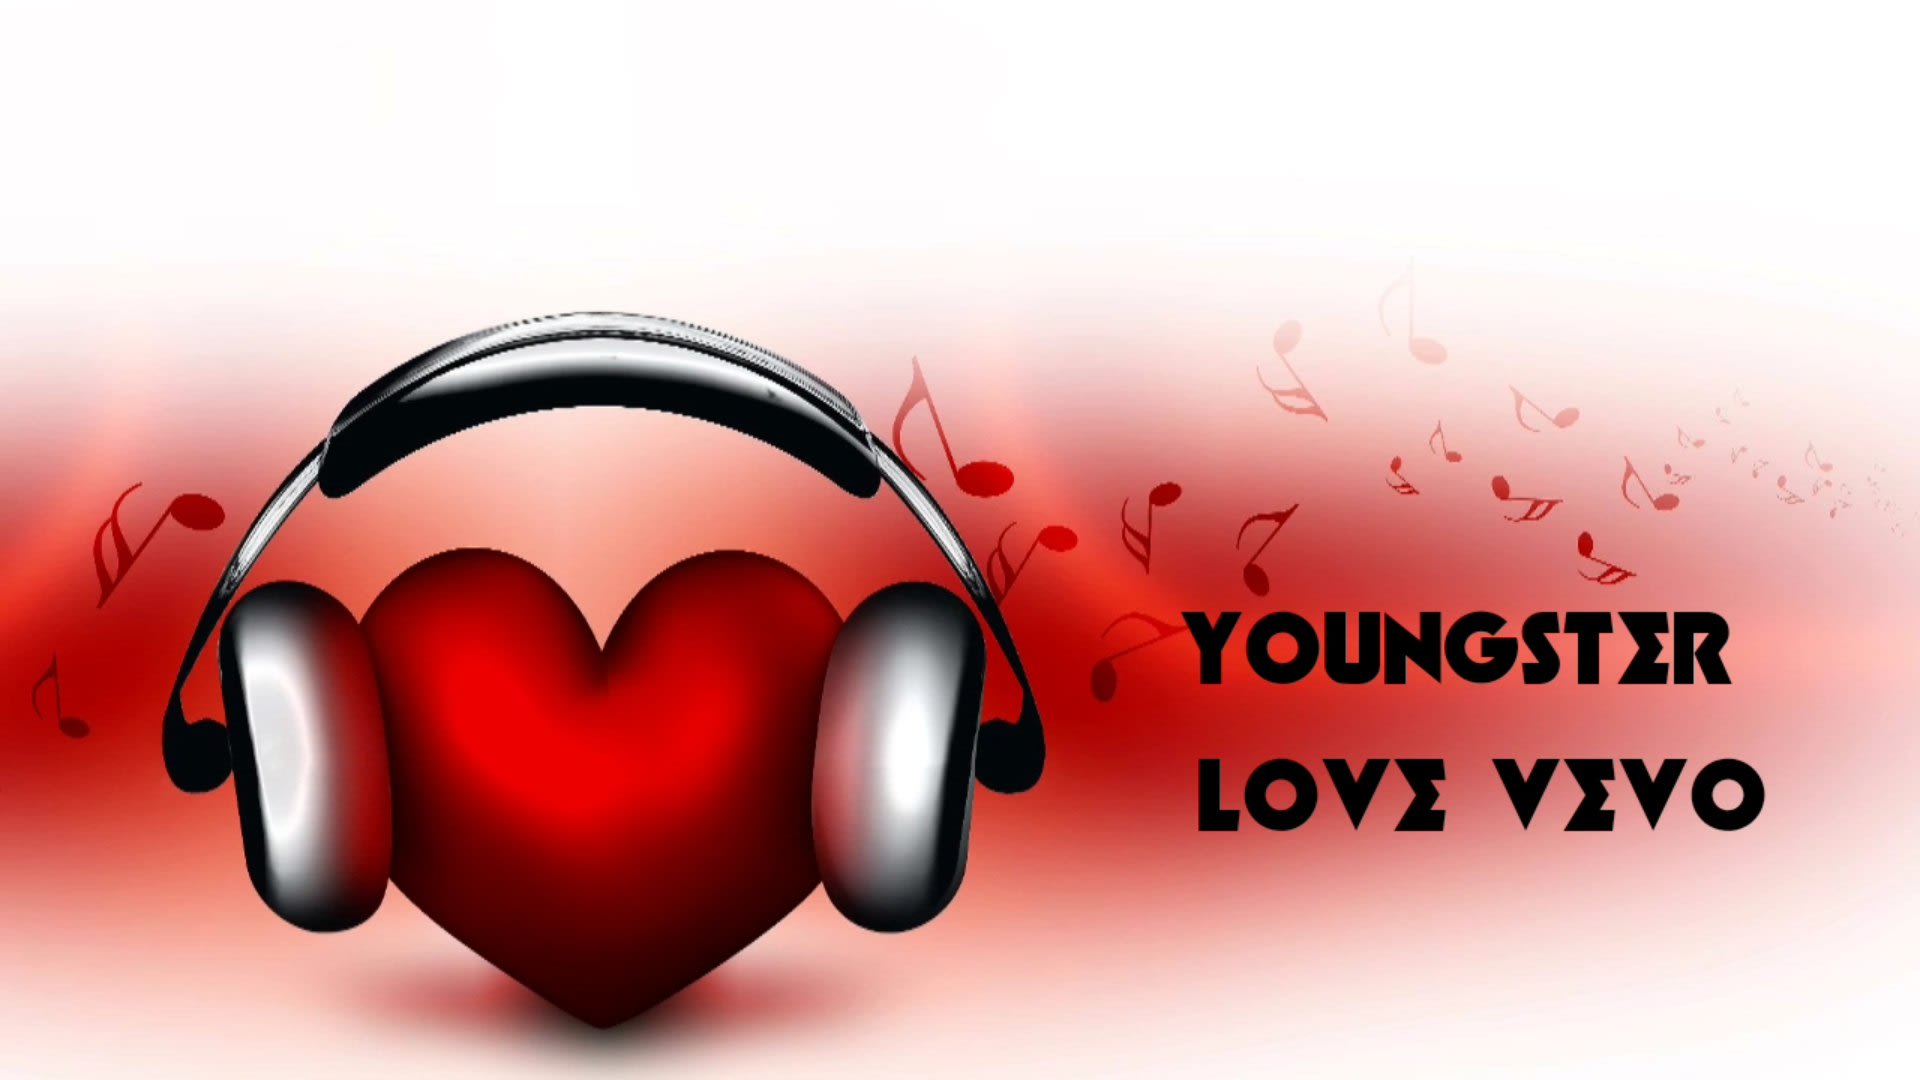 YOUNGSTER'S LOVE VEVO